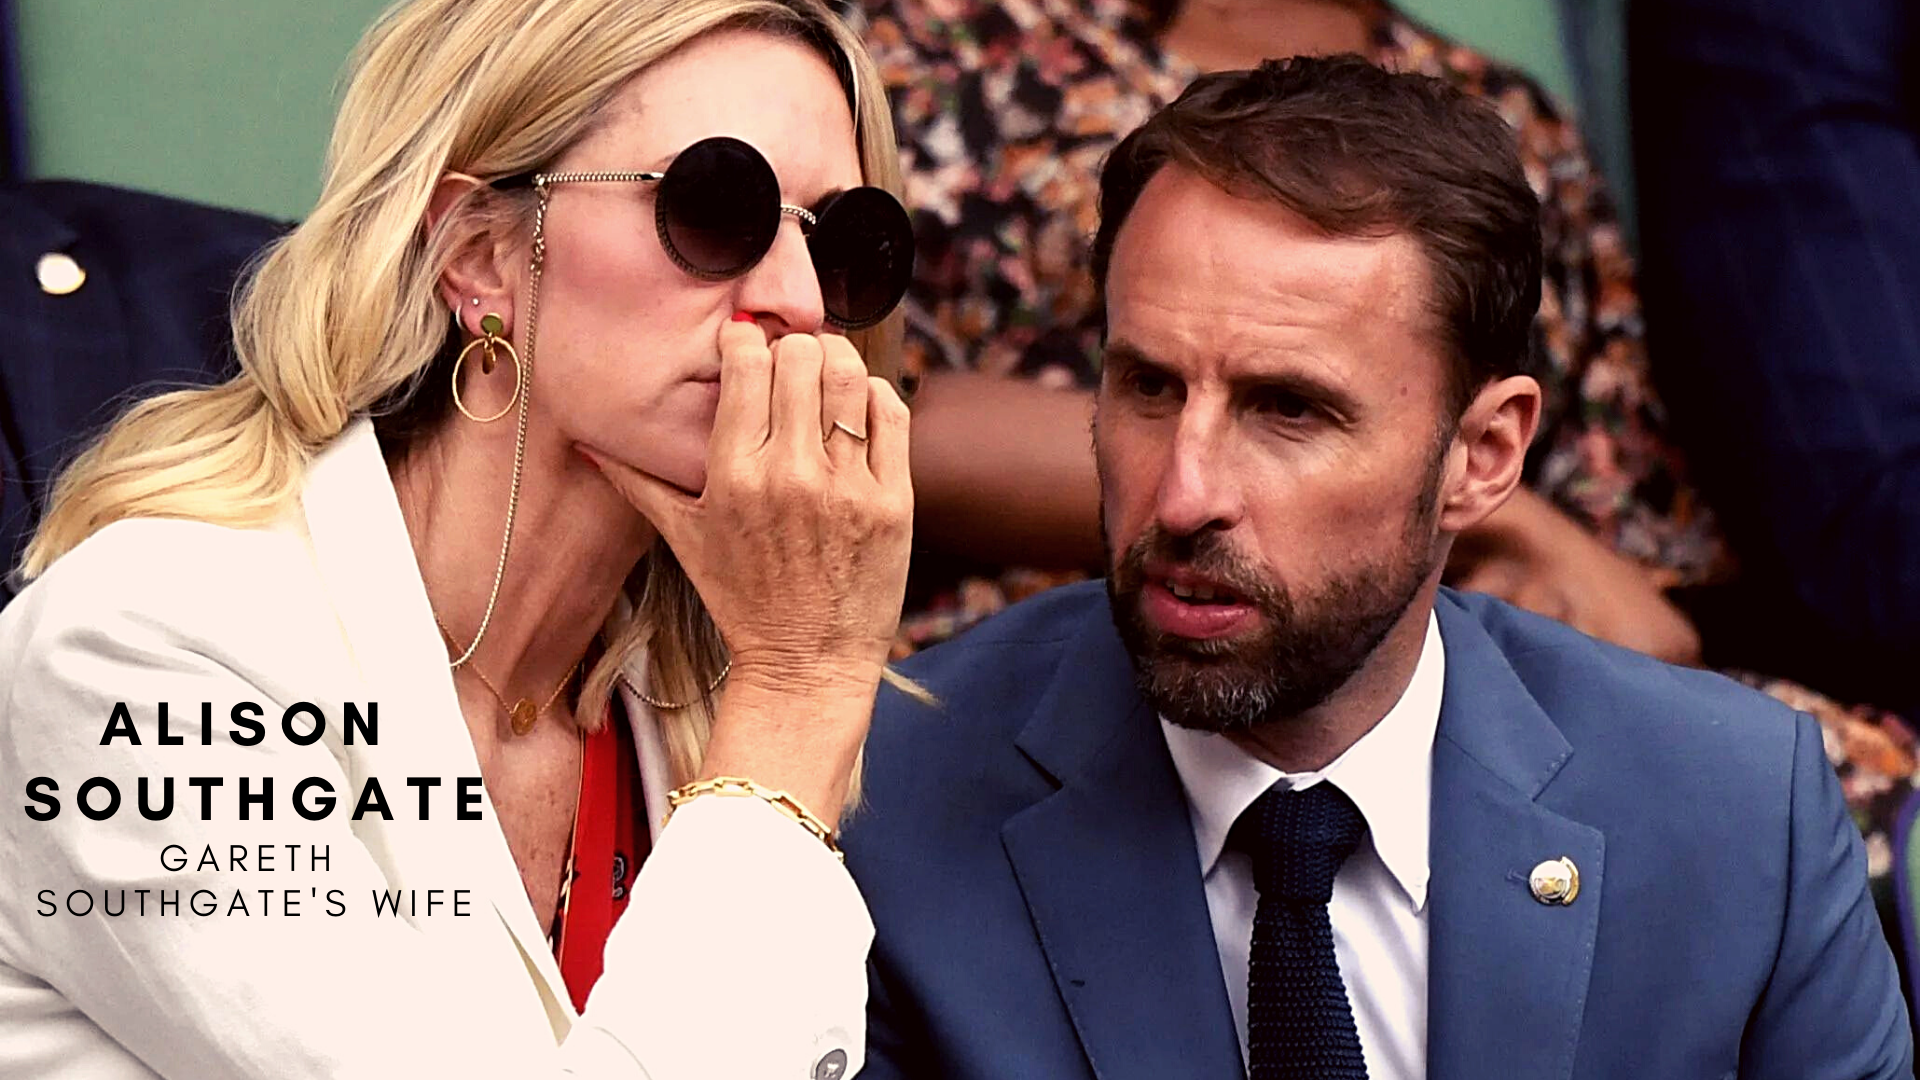 Gareth Southgate with wife Alison Southgate. (Images - Getty)